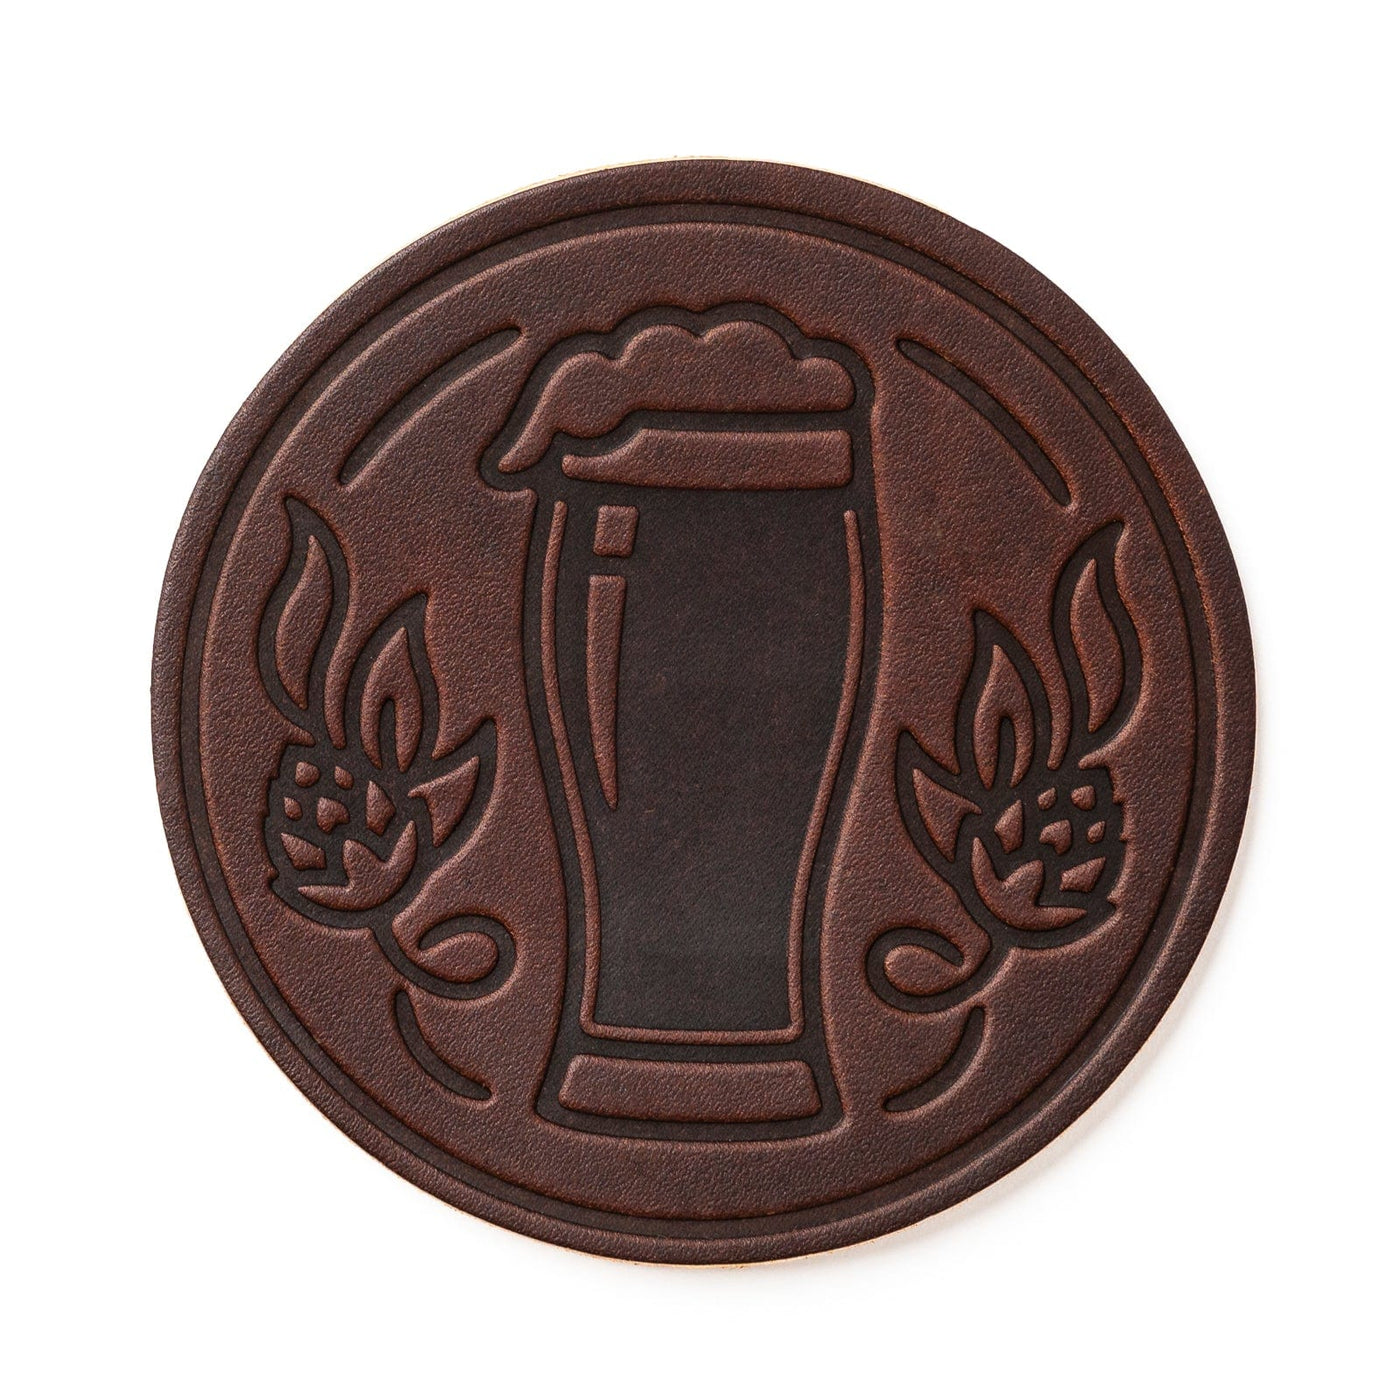 Stout Coasters - Heritage Brown - 4 Pack Popov Leather